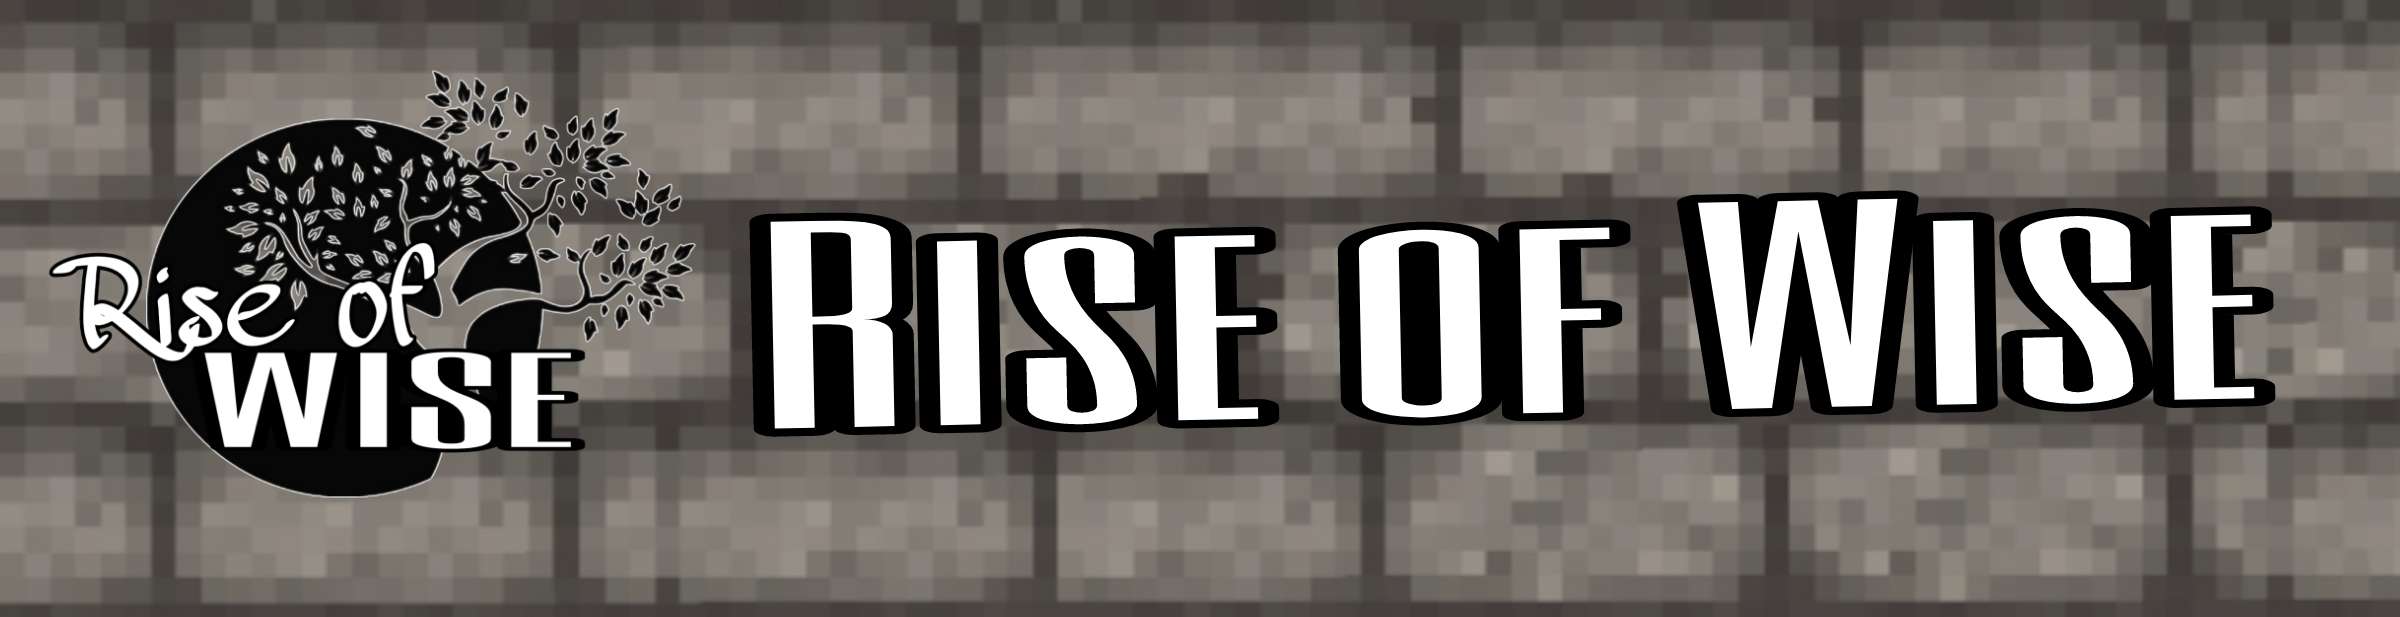 Rise Of Wise - Beta Demo